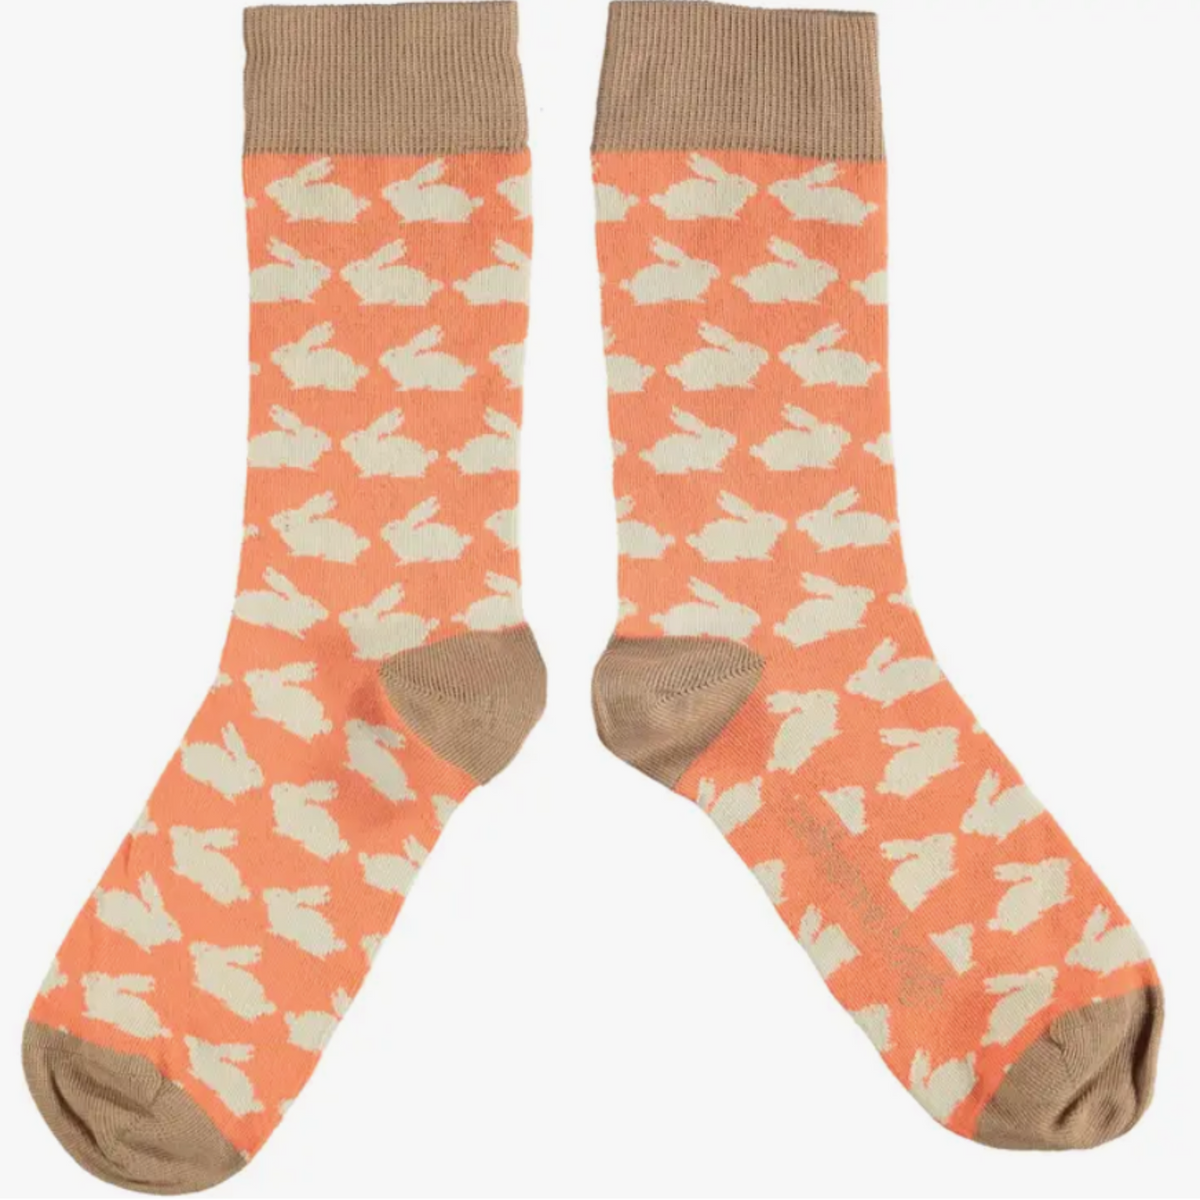 Catherine Tough Rabbit cotton women&#39;s crew socks with white rabbit silhouettes on a peach background with brown cuff, heel and toe